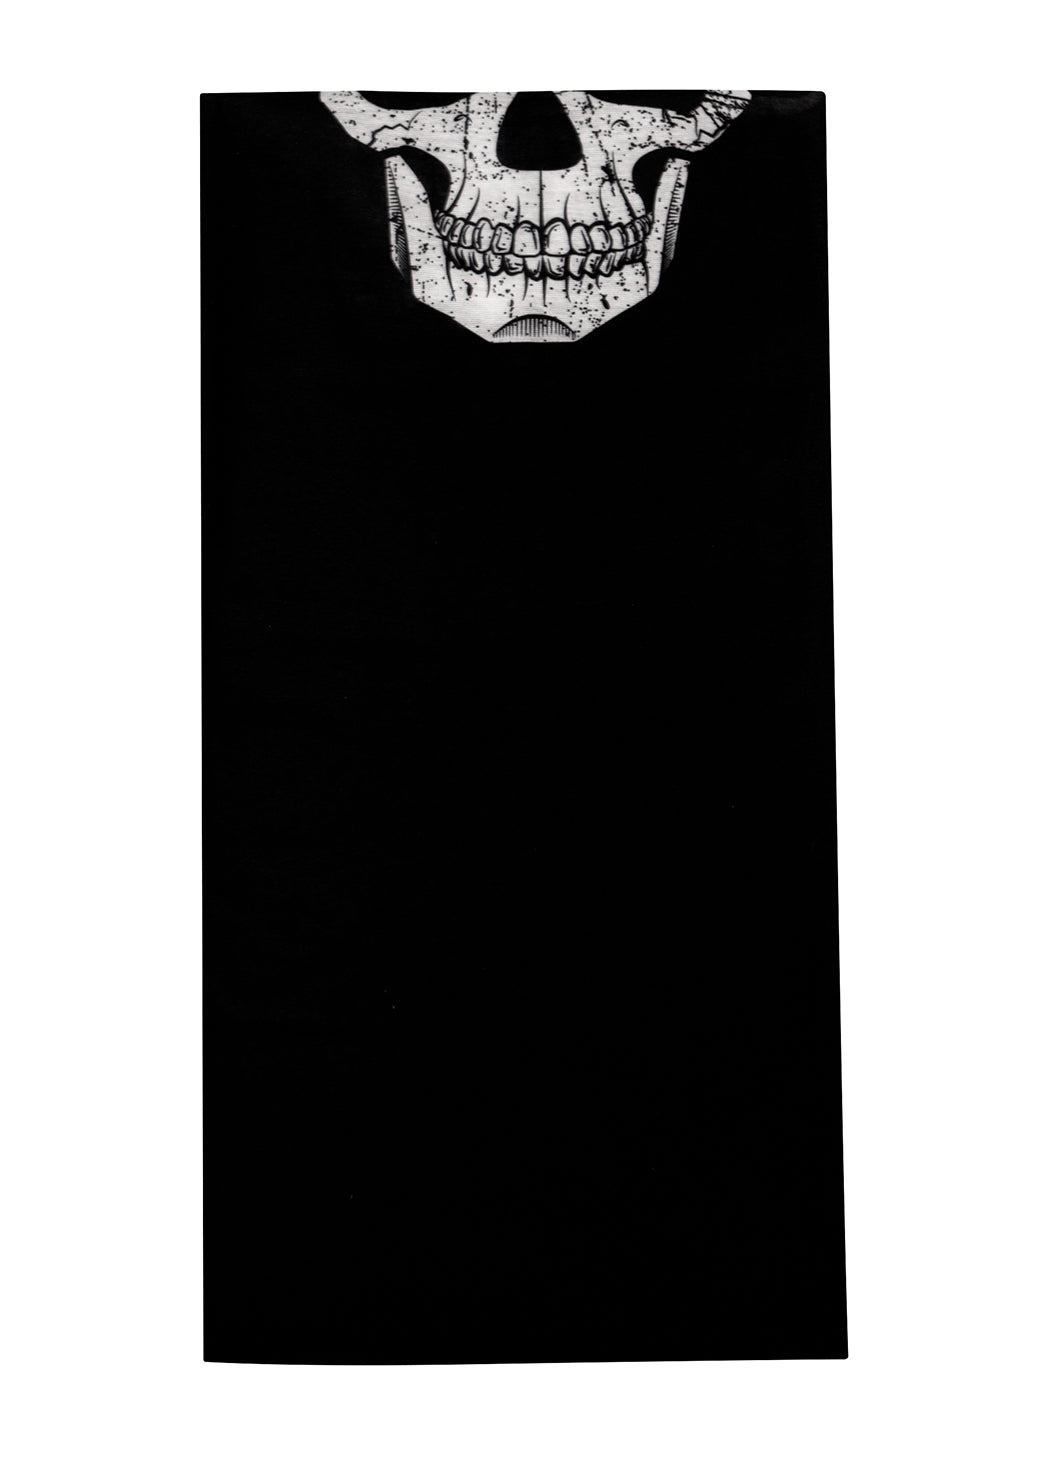 Motorcycle Riding Neck Gaiter and Face Covering - SKULL Print